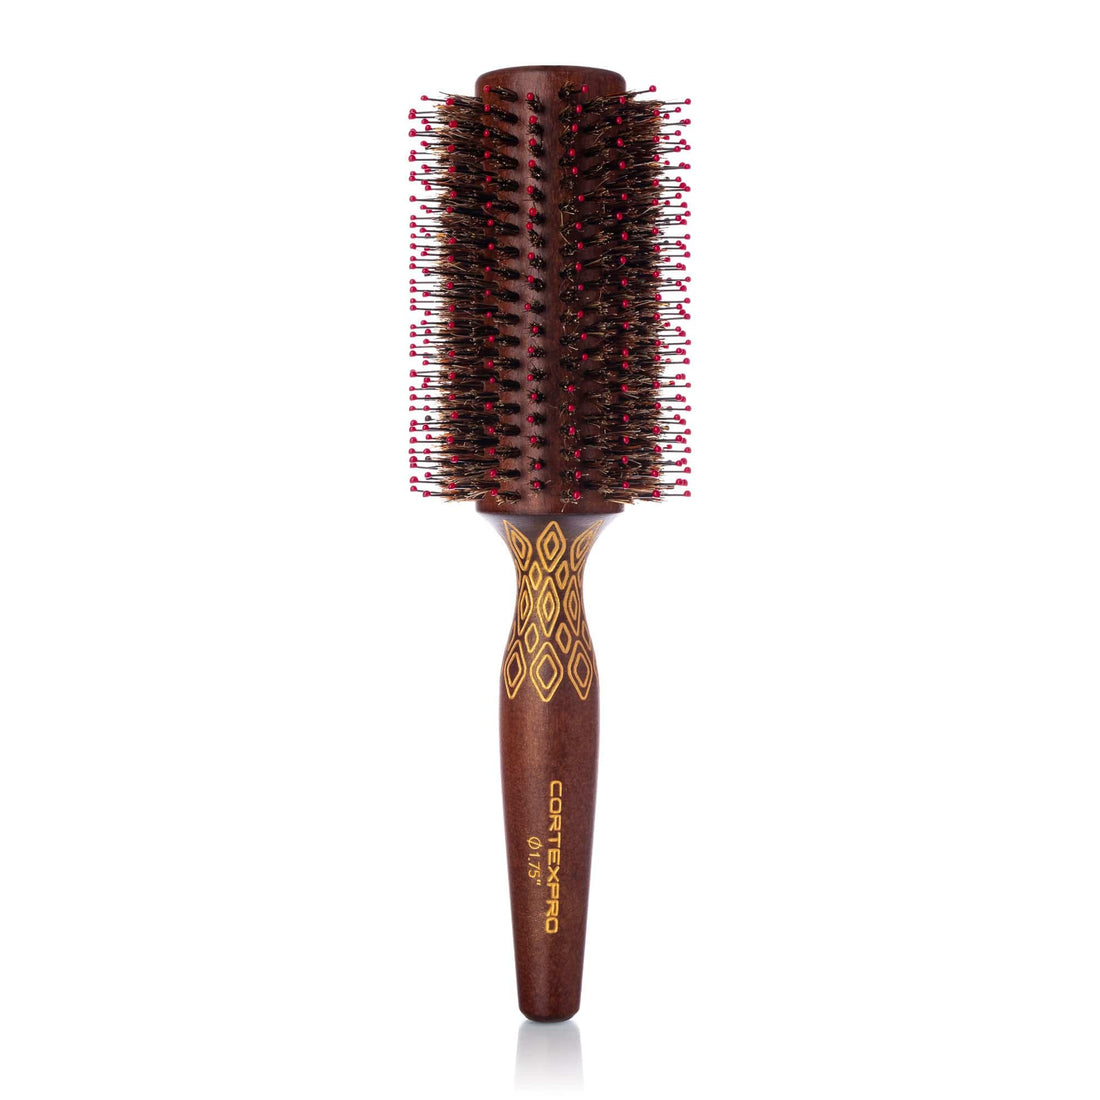 Cortex Professional 100% Boar Bristle Round Hair Brush - For Women and Men,  For All Hair Types, Round Boar Hair Brush, Natural and Soft Hair Brush 